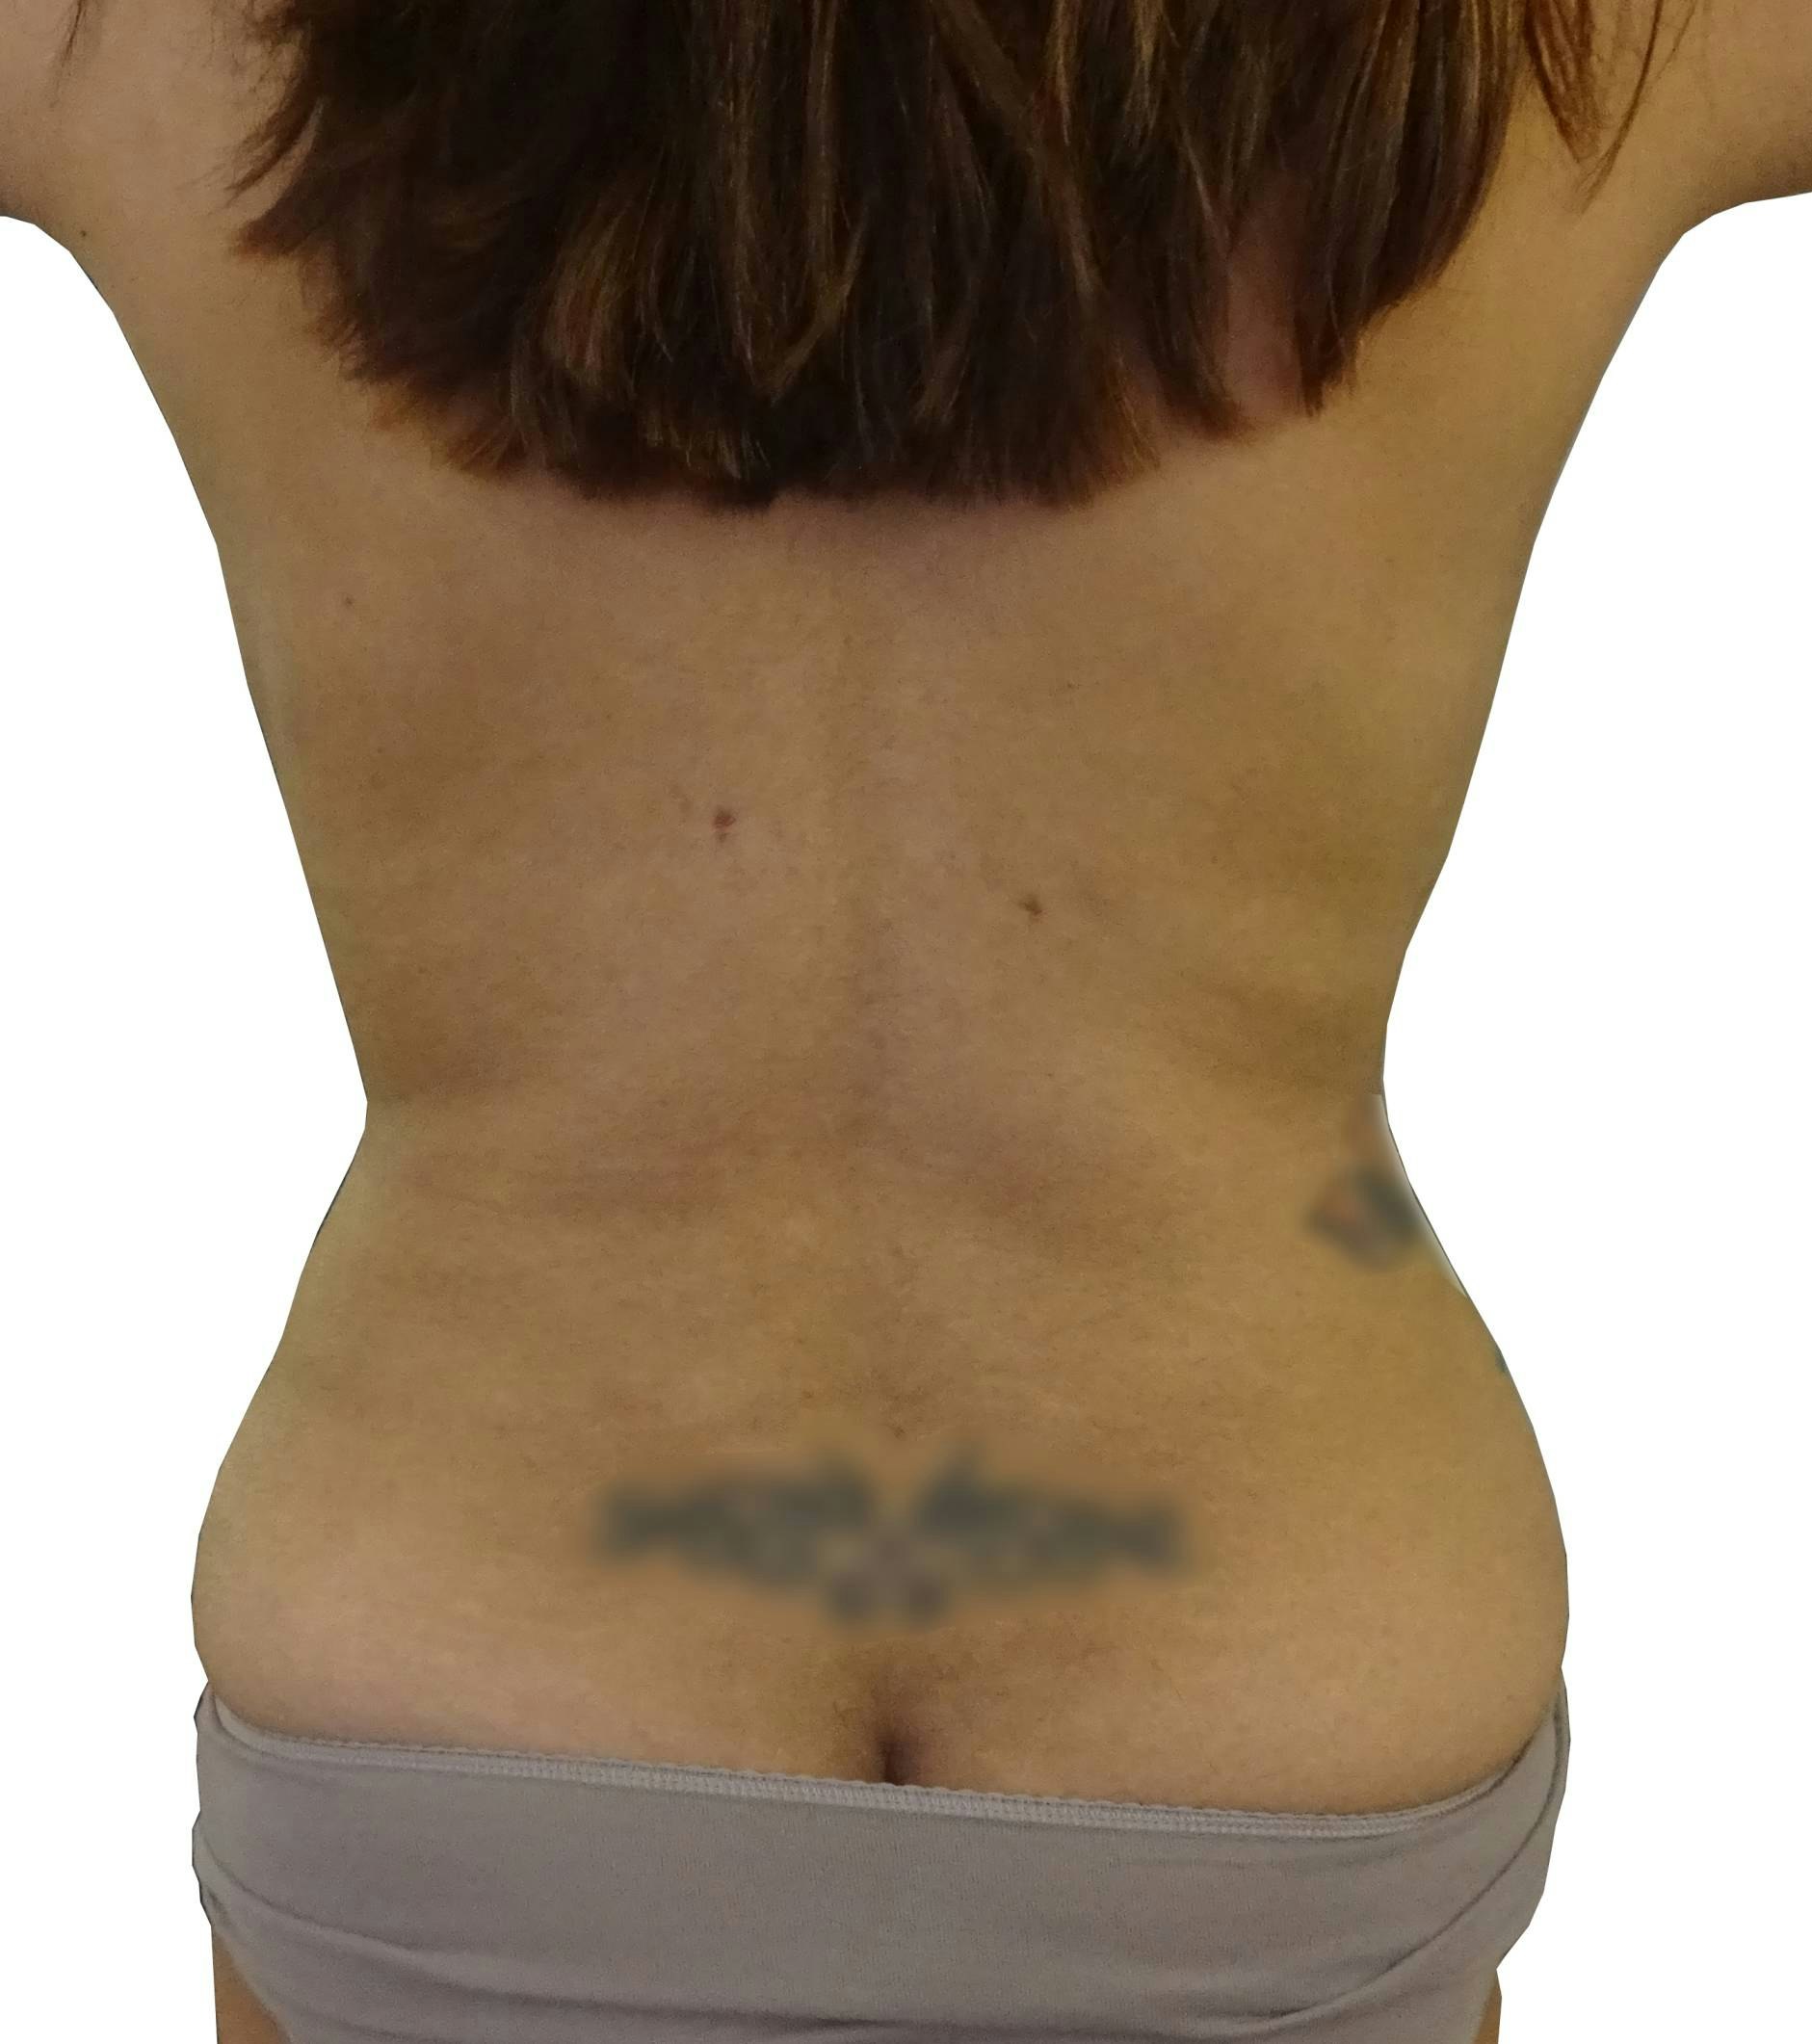 Liposuction - Before and Afters